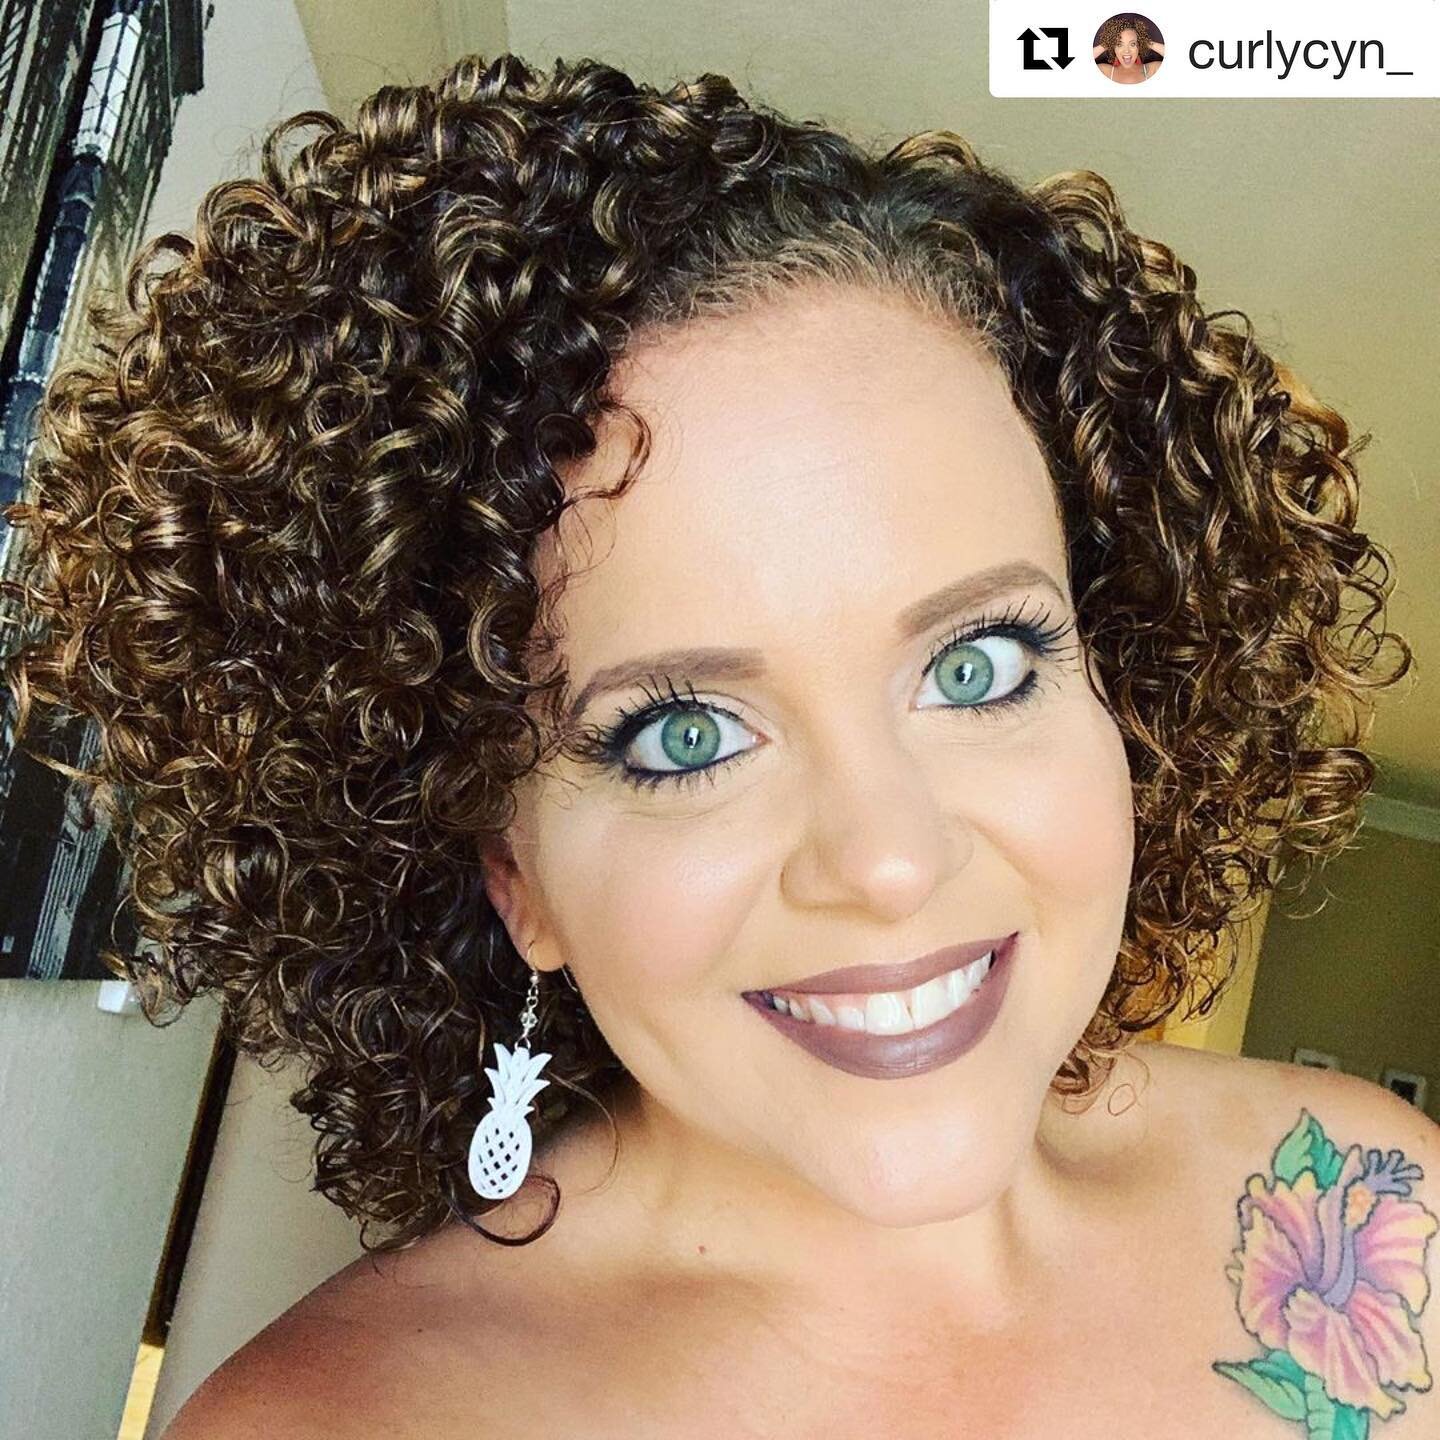 How great do these @crabshackdesign earrings look on @curlycyn_ 🤩🍍💙
Hand twisted sterling silver, Swarovski crystals and laser cut acrylic😍 whaddaya think!?
Free shipping in my Etsy shop!
Aloha + stay crabby!
✌🏻💙🦀
.
.
.
#earrings #earring #oot